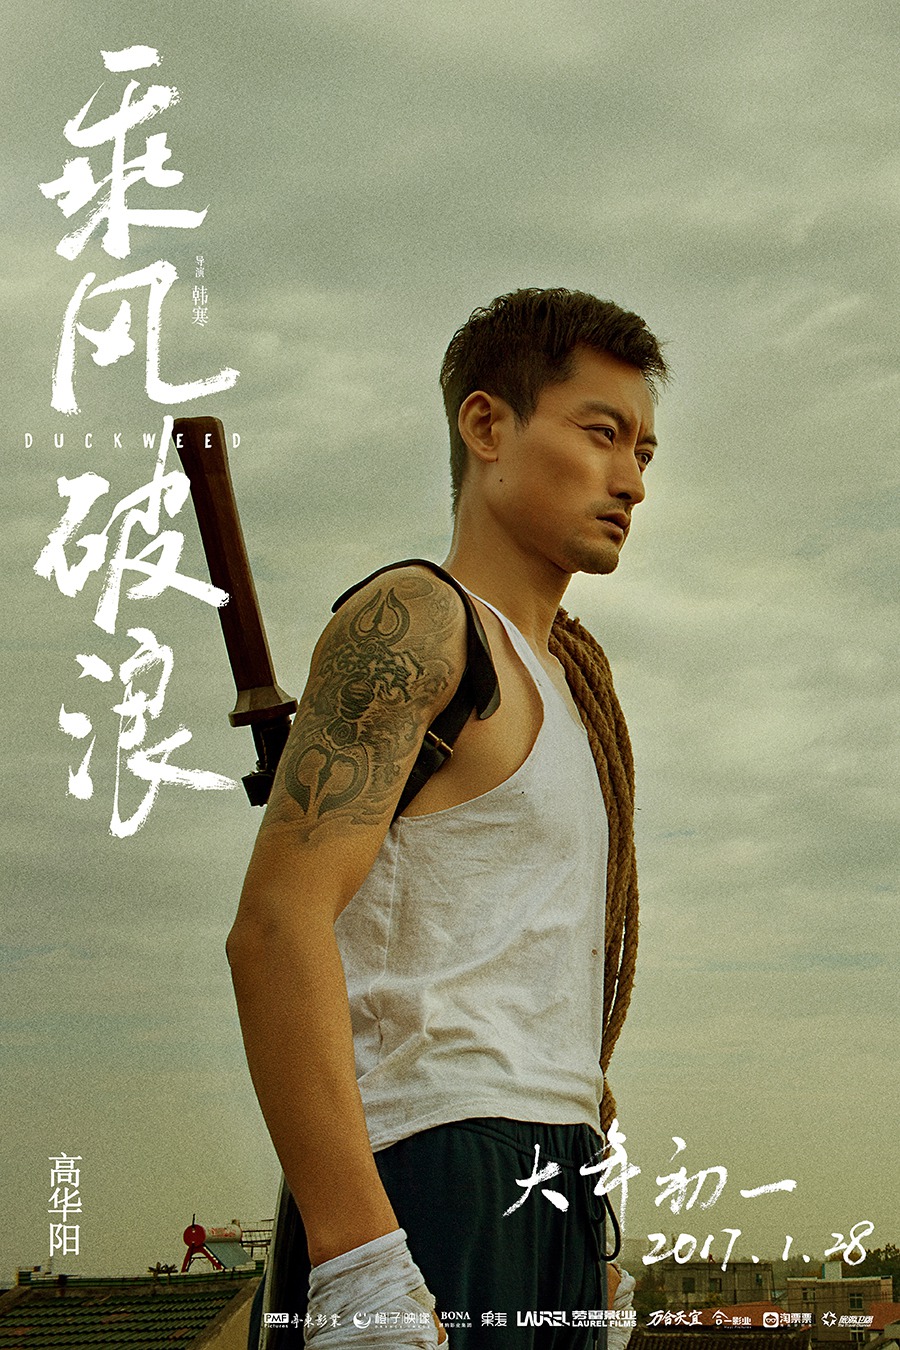 Extra Large Movie Poster Image for Cheng feng po lang (#12 of 13)